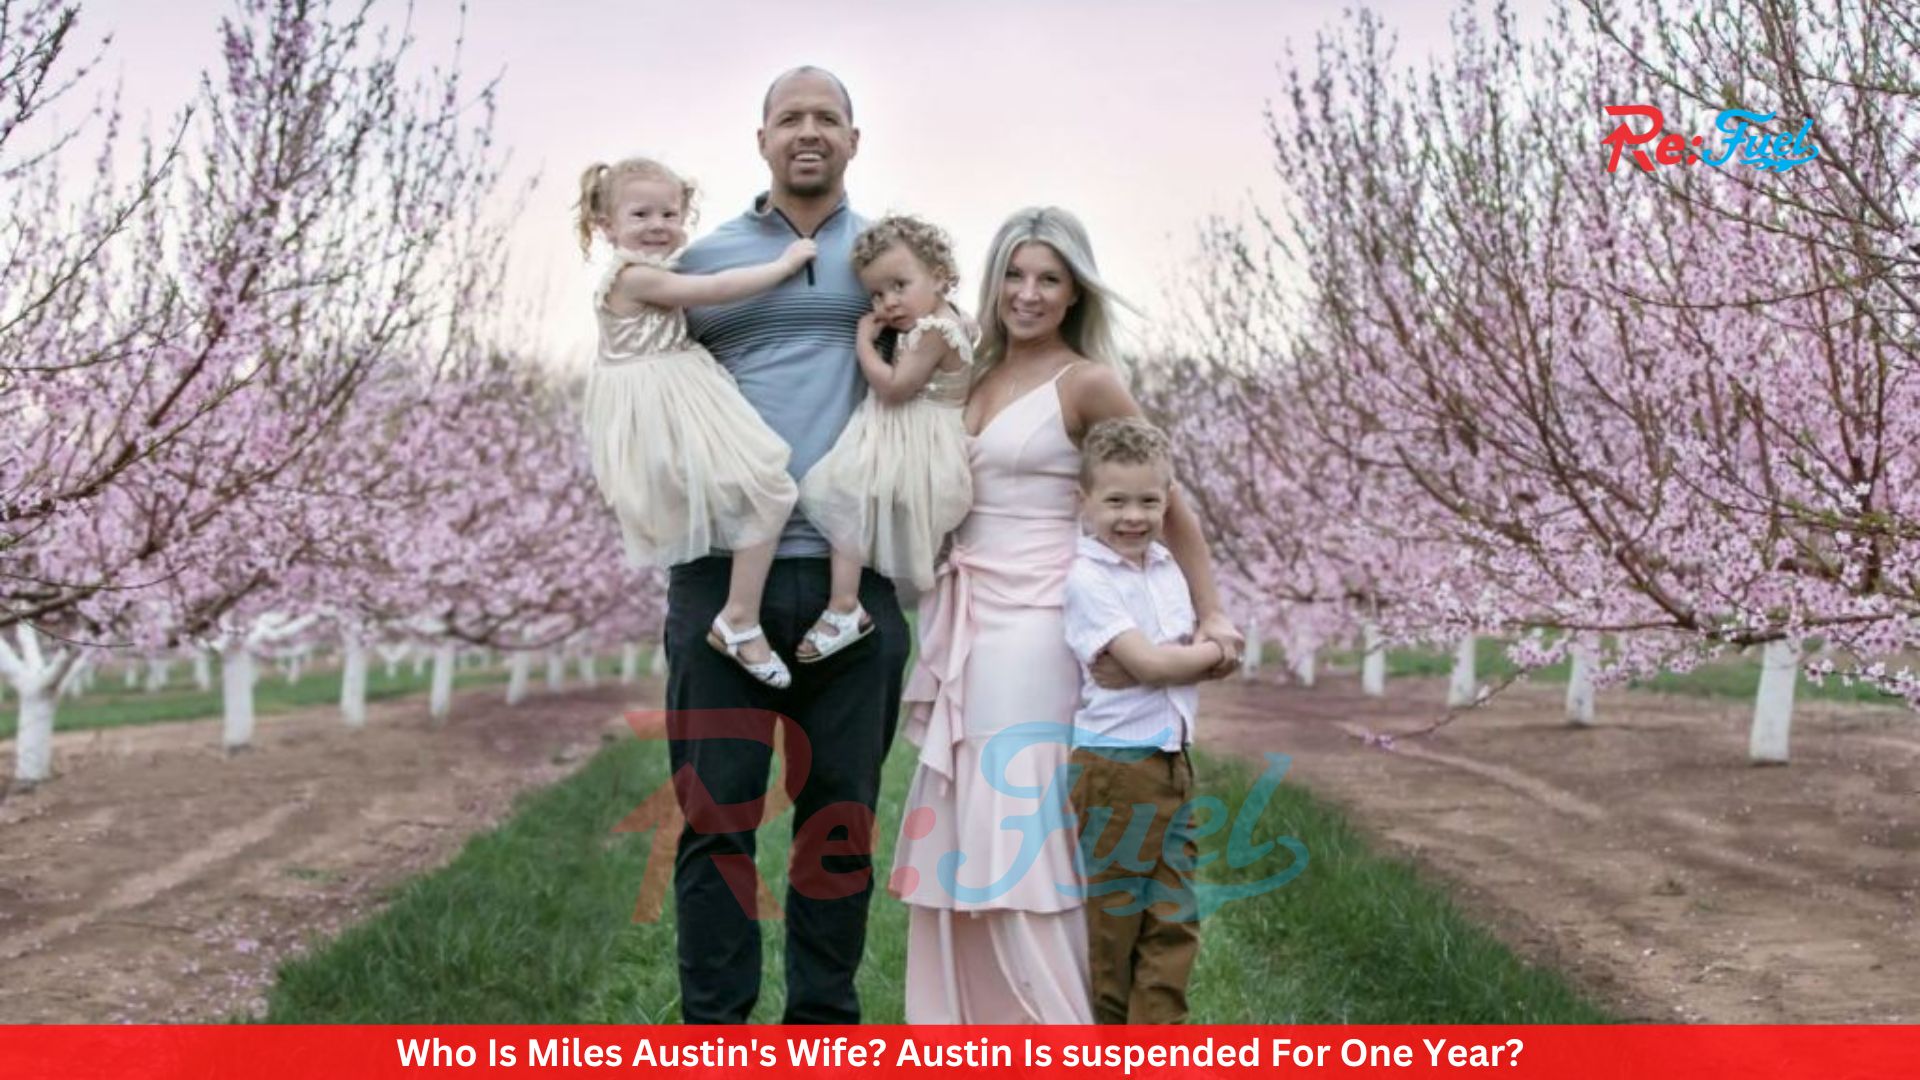 Who Is Miles Austin's Wife? Austin Is suspended For One Year?